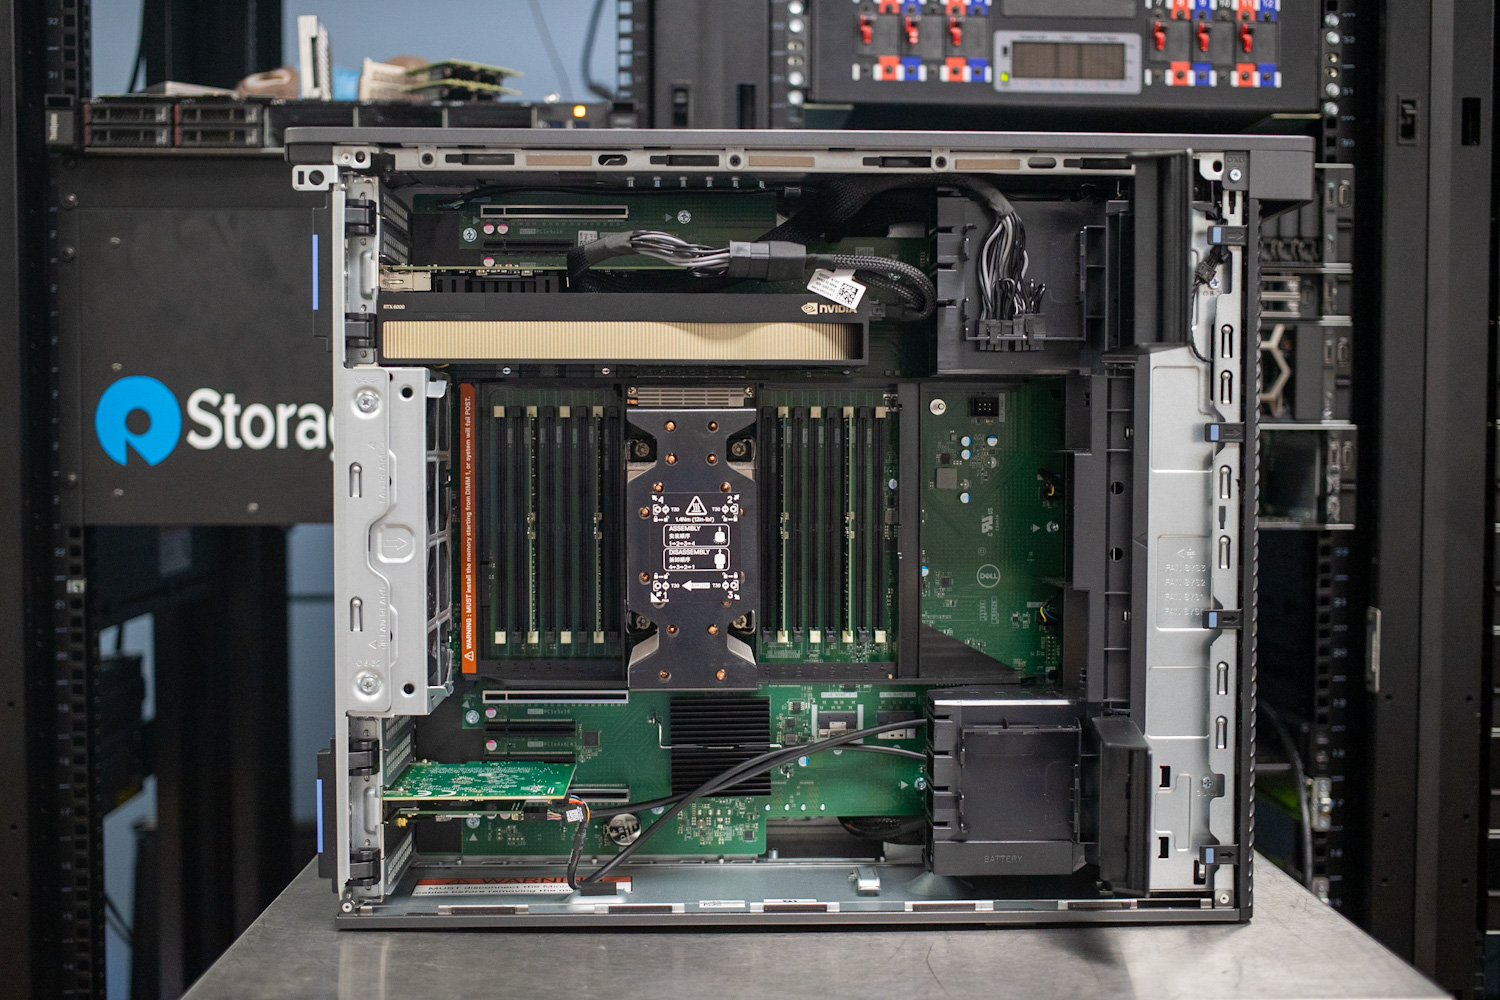 Inside view of the Precision 7960 with the side panel and internal air ducting removed, Putting the NVIDIA RTX 6000 ADA on full display.